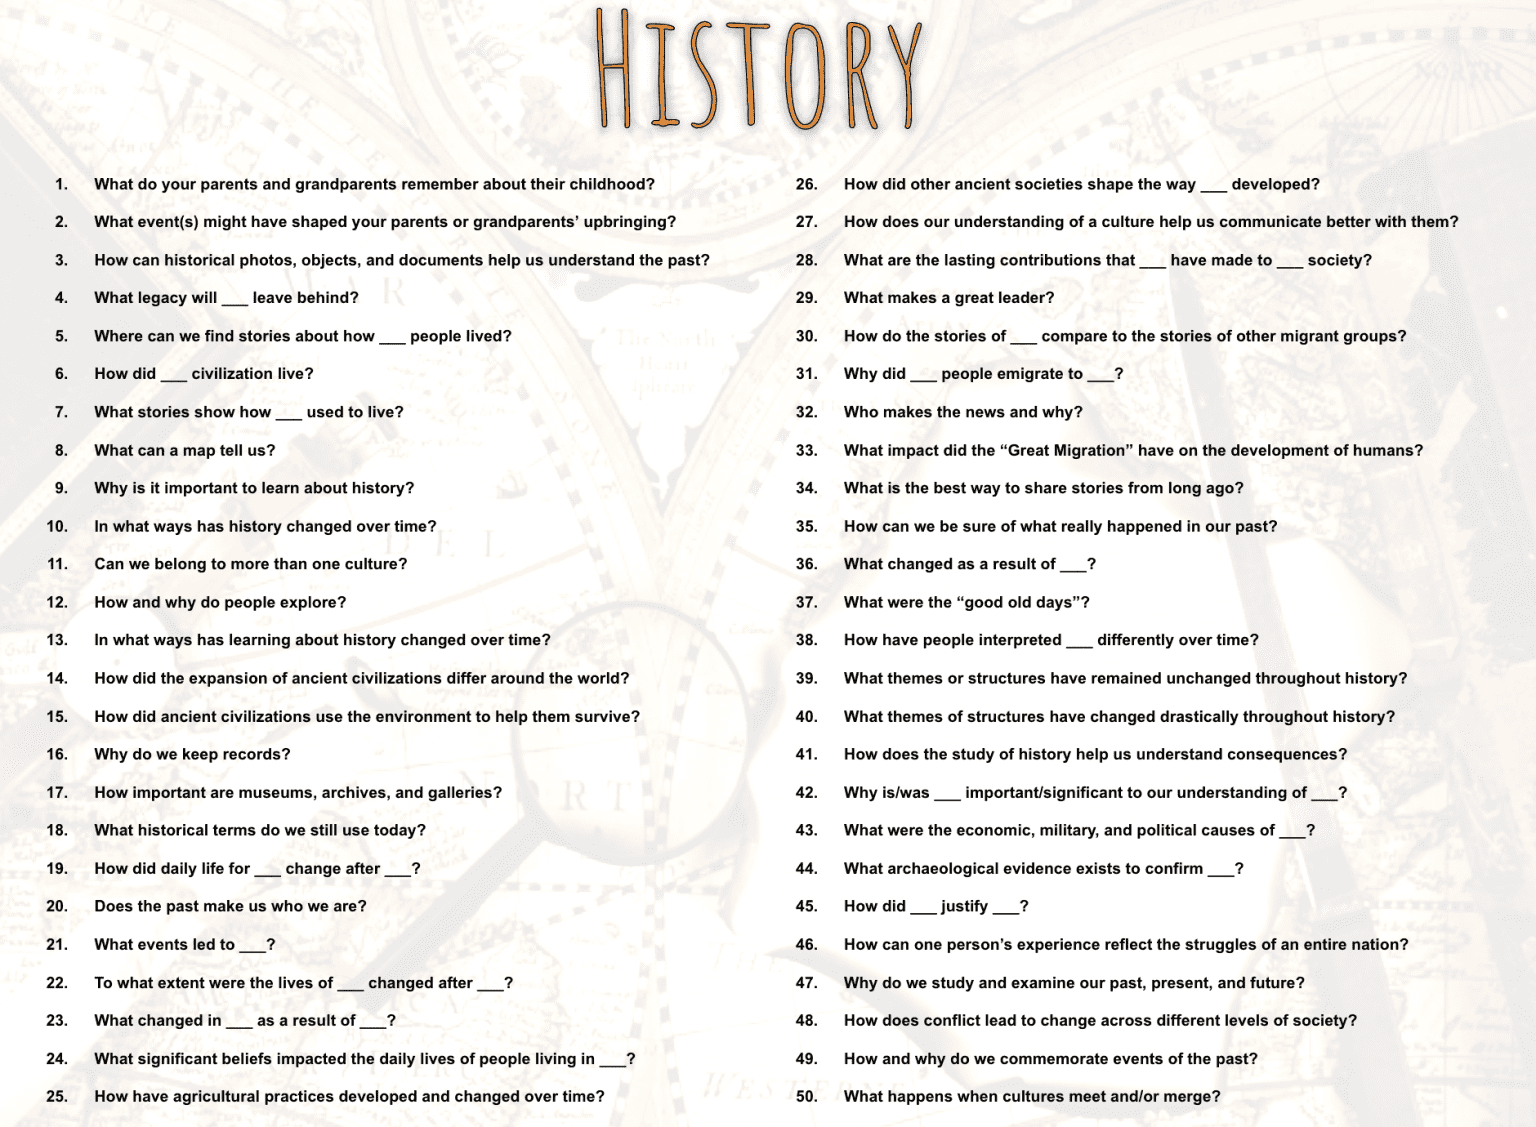 research questions on history